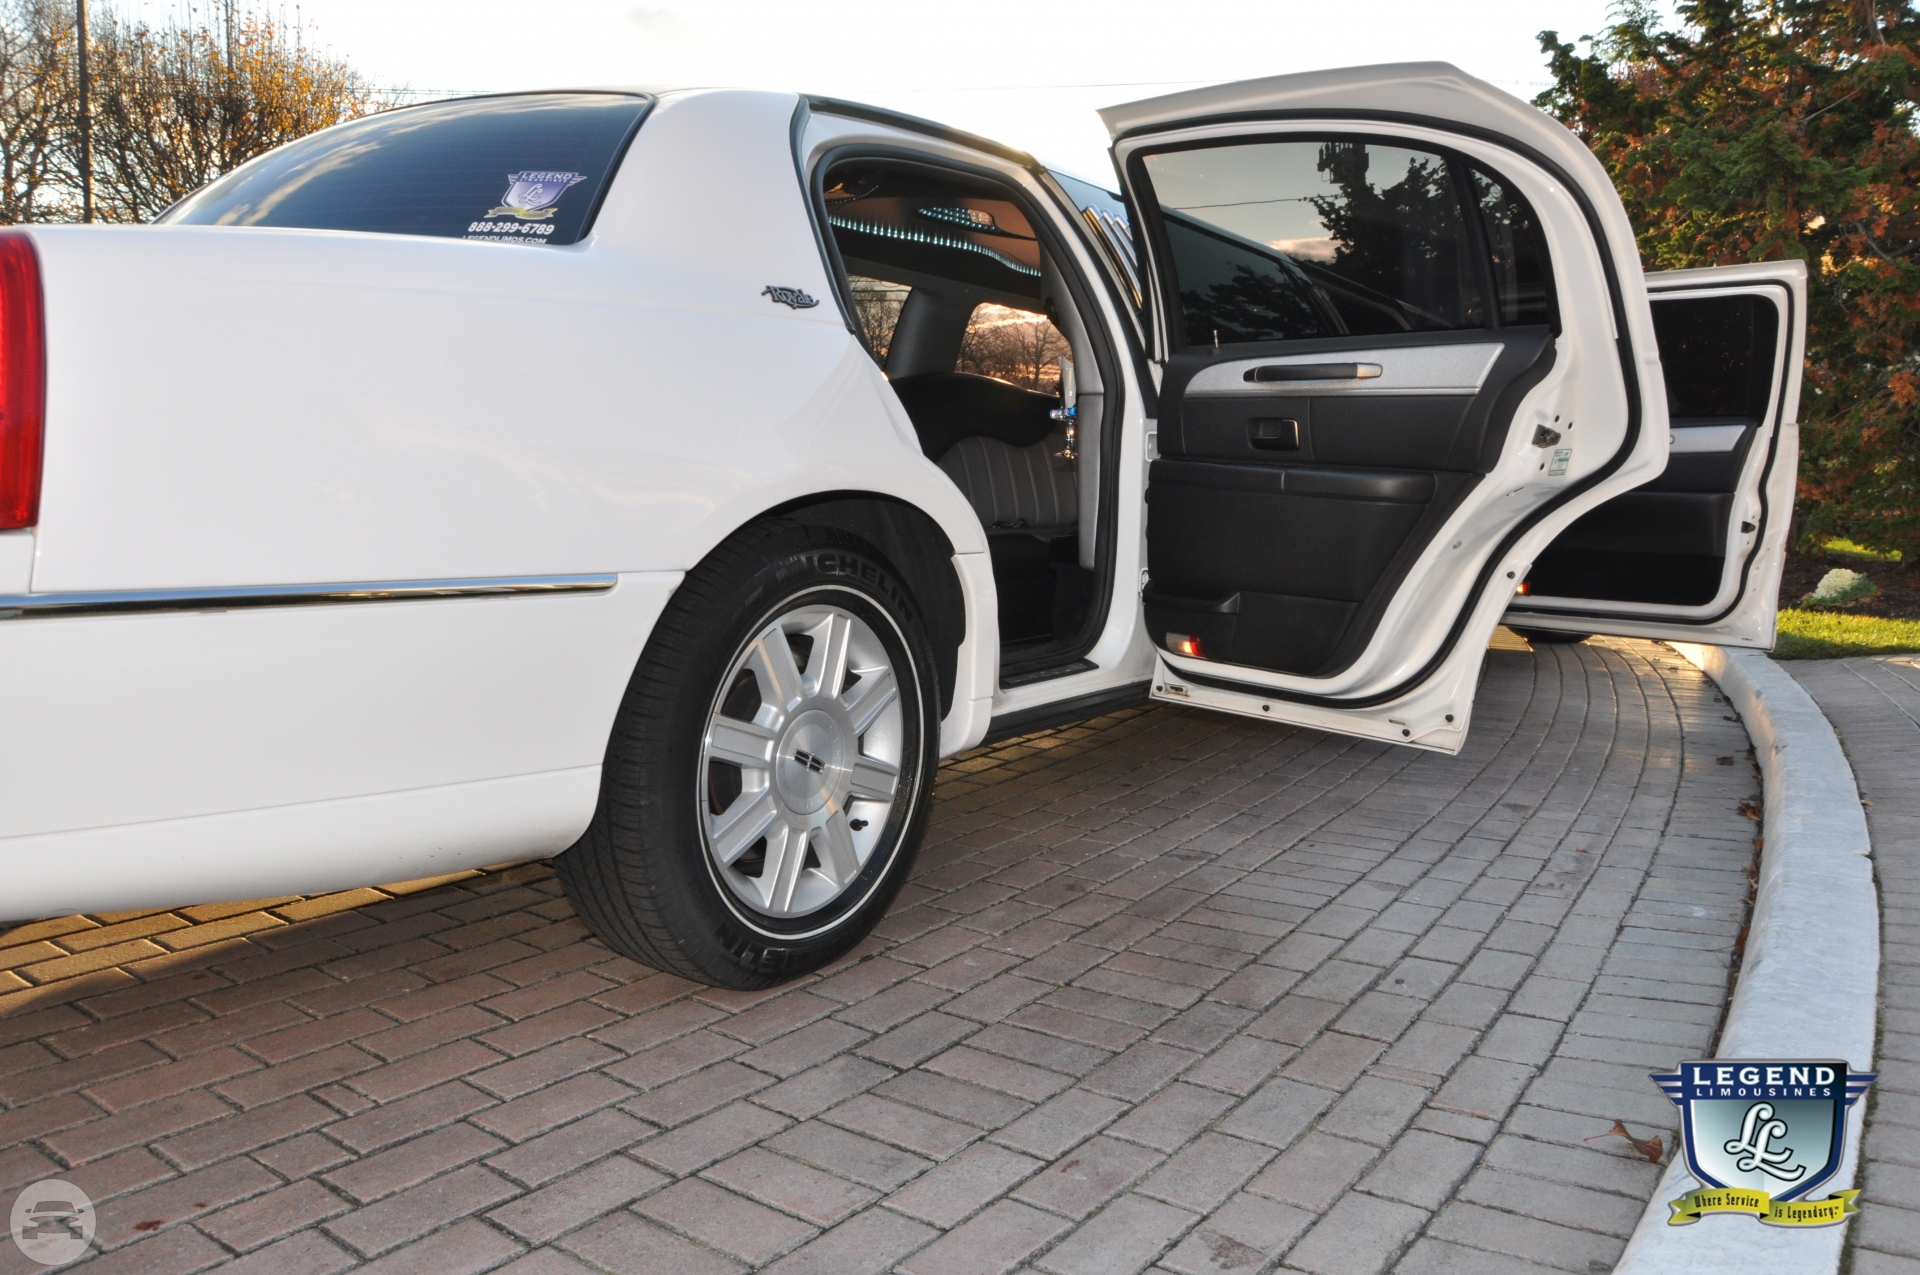 8-10 Passenger Lincoln Stretch Limousines
Limo /
New York, NY

 / Hourly $0.00
